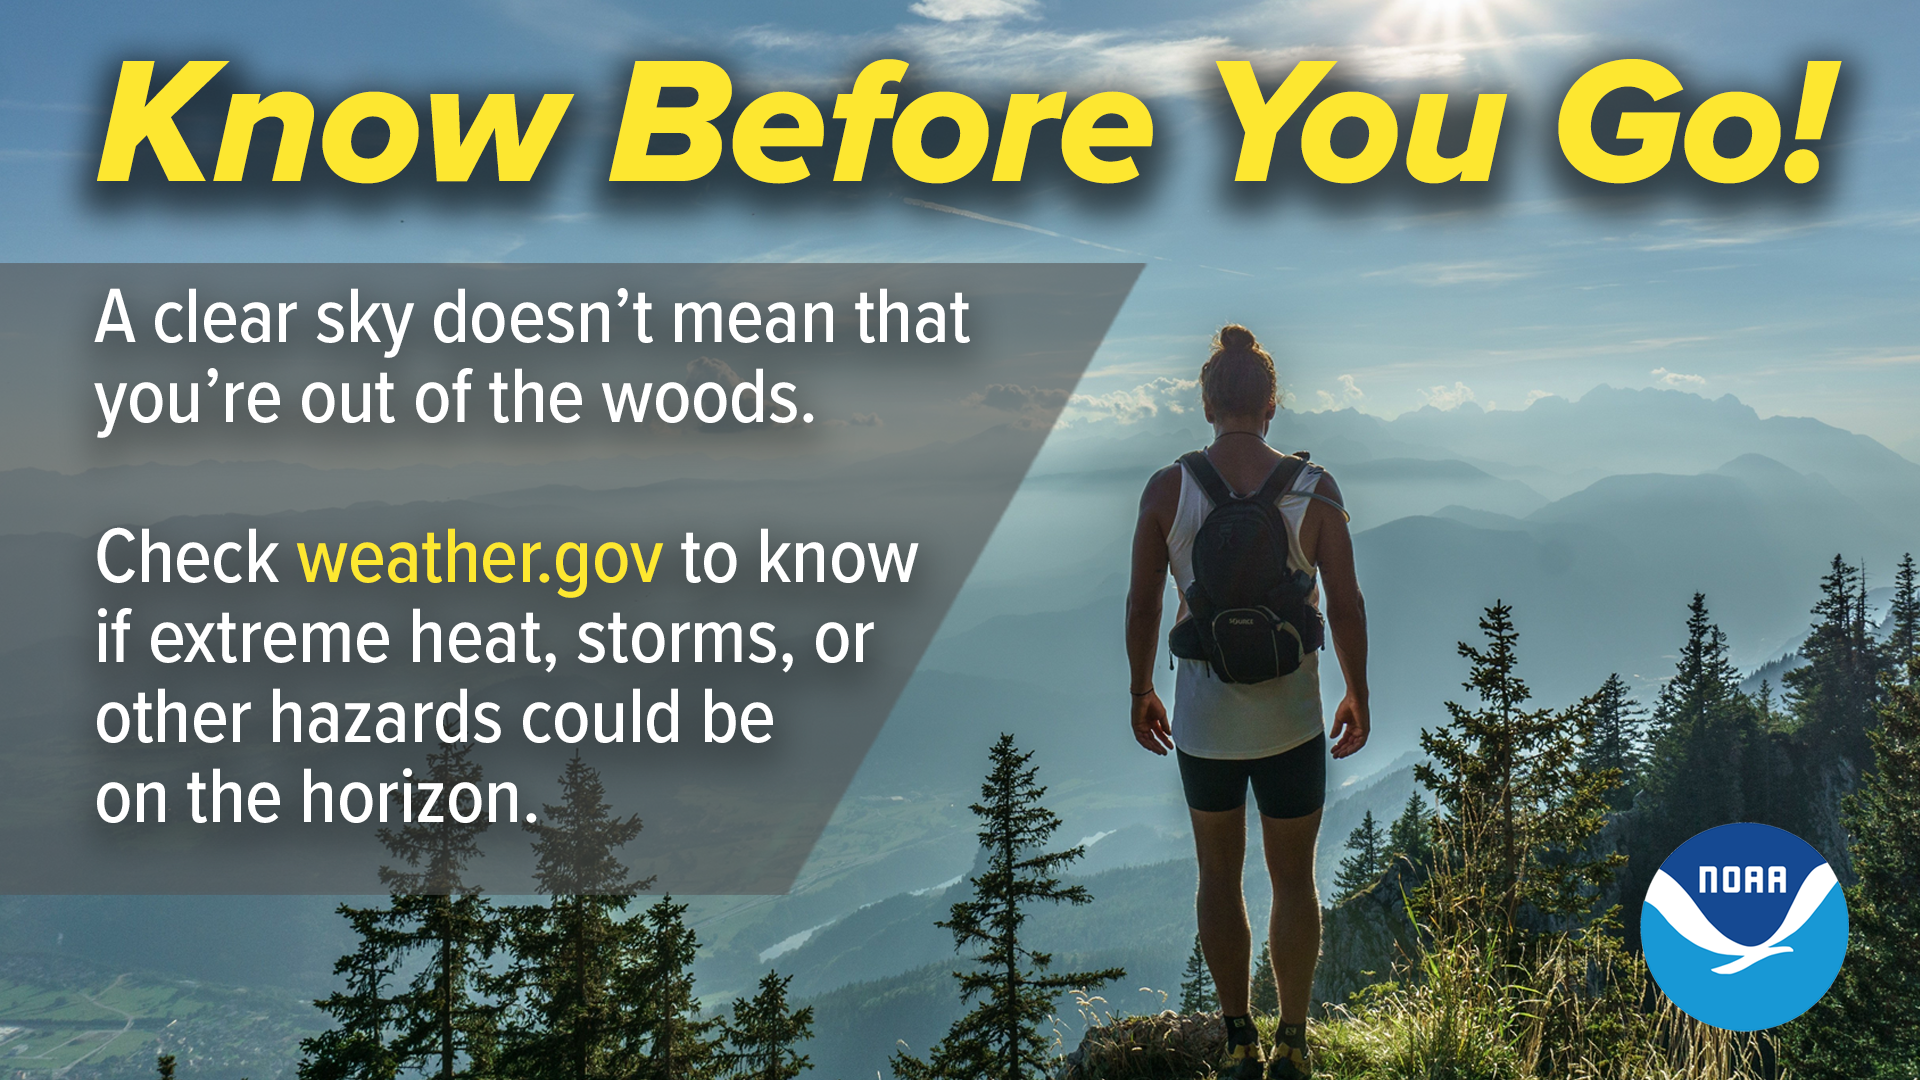 Know before you go! A clear sky doesn't mean that you're out of the woods. Check weather.gov to know if extreme heat, storms, or other hazards could be on the horizon.